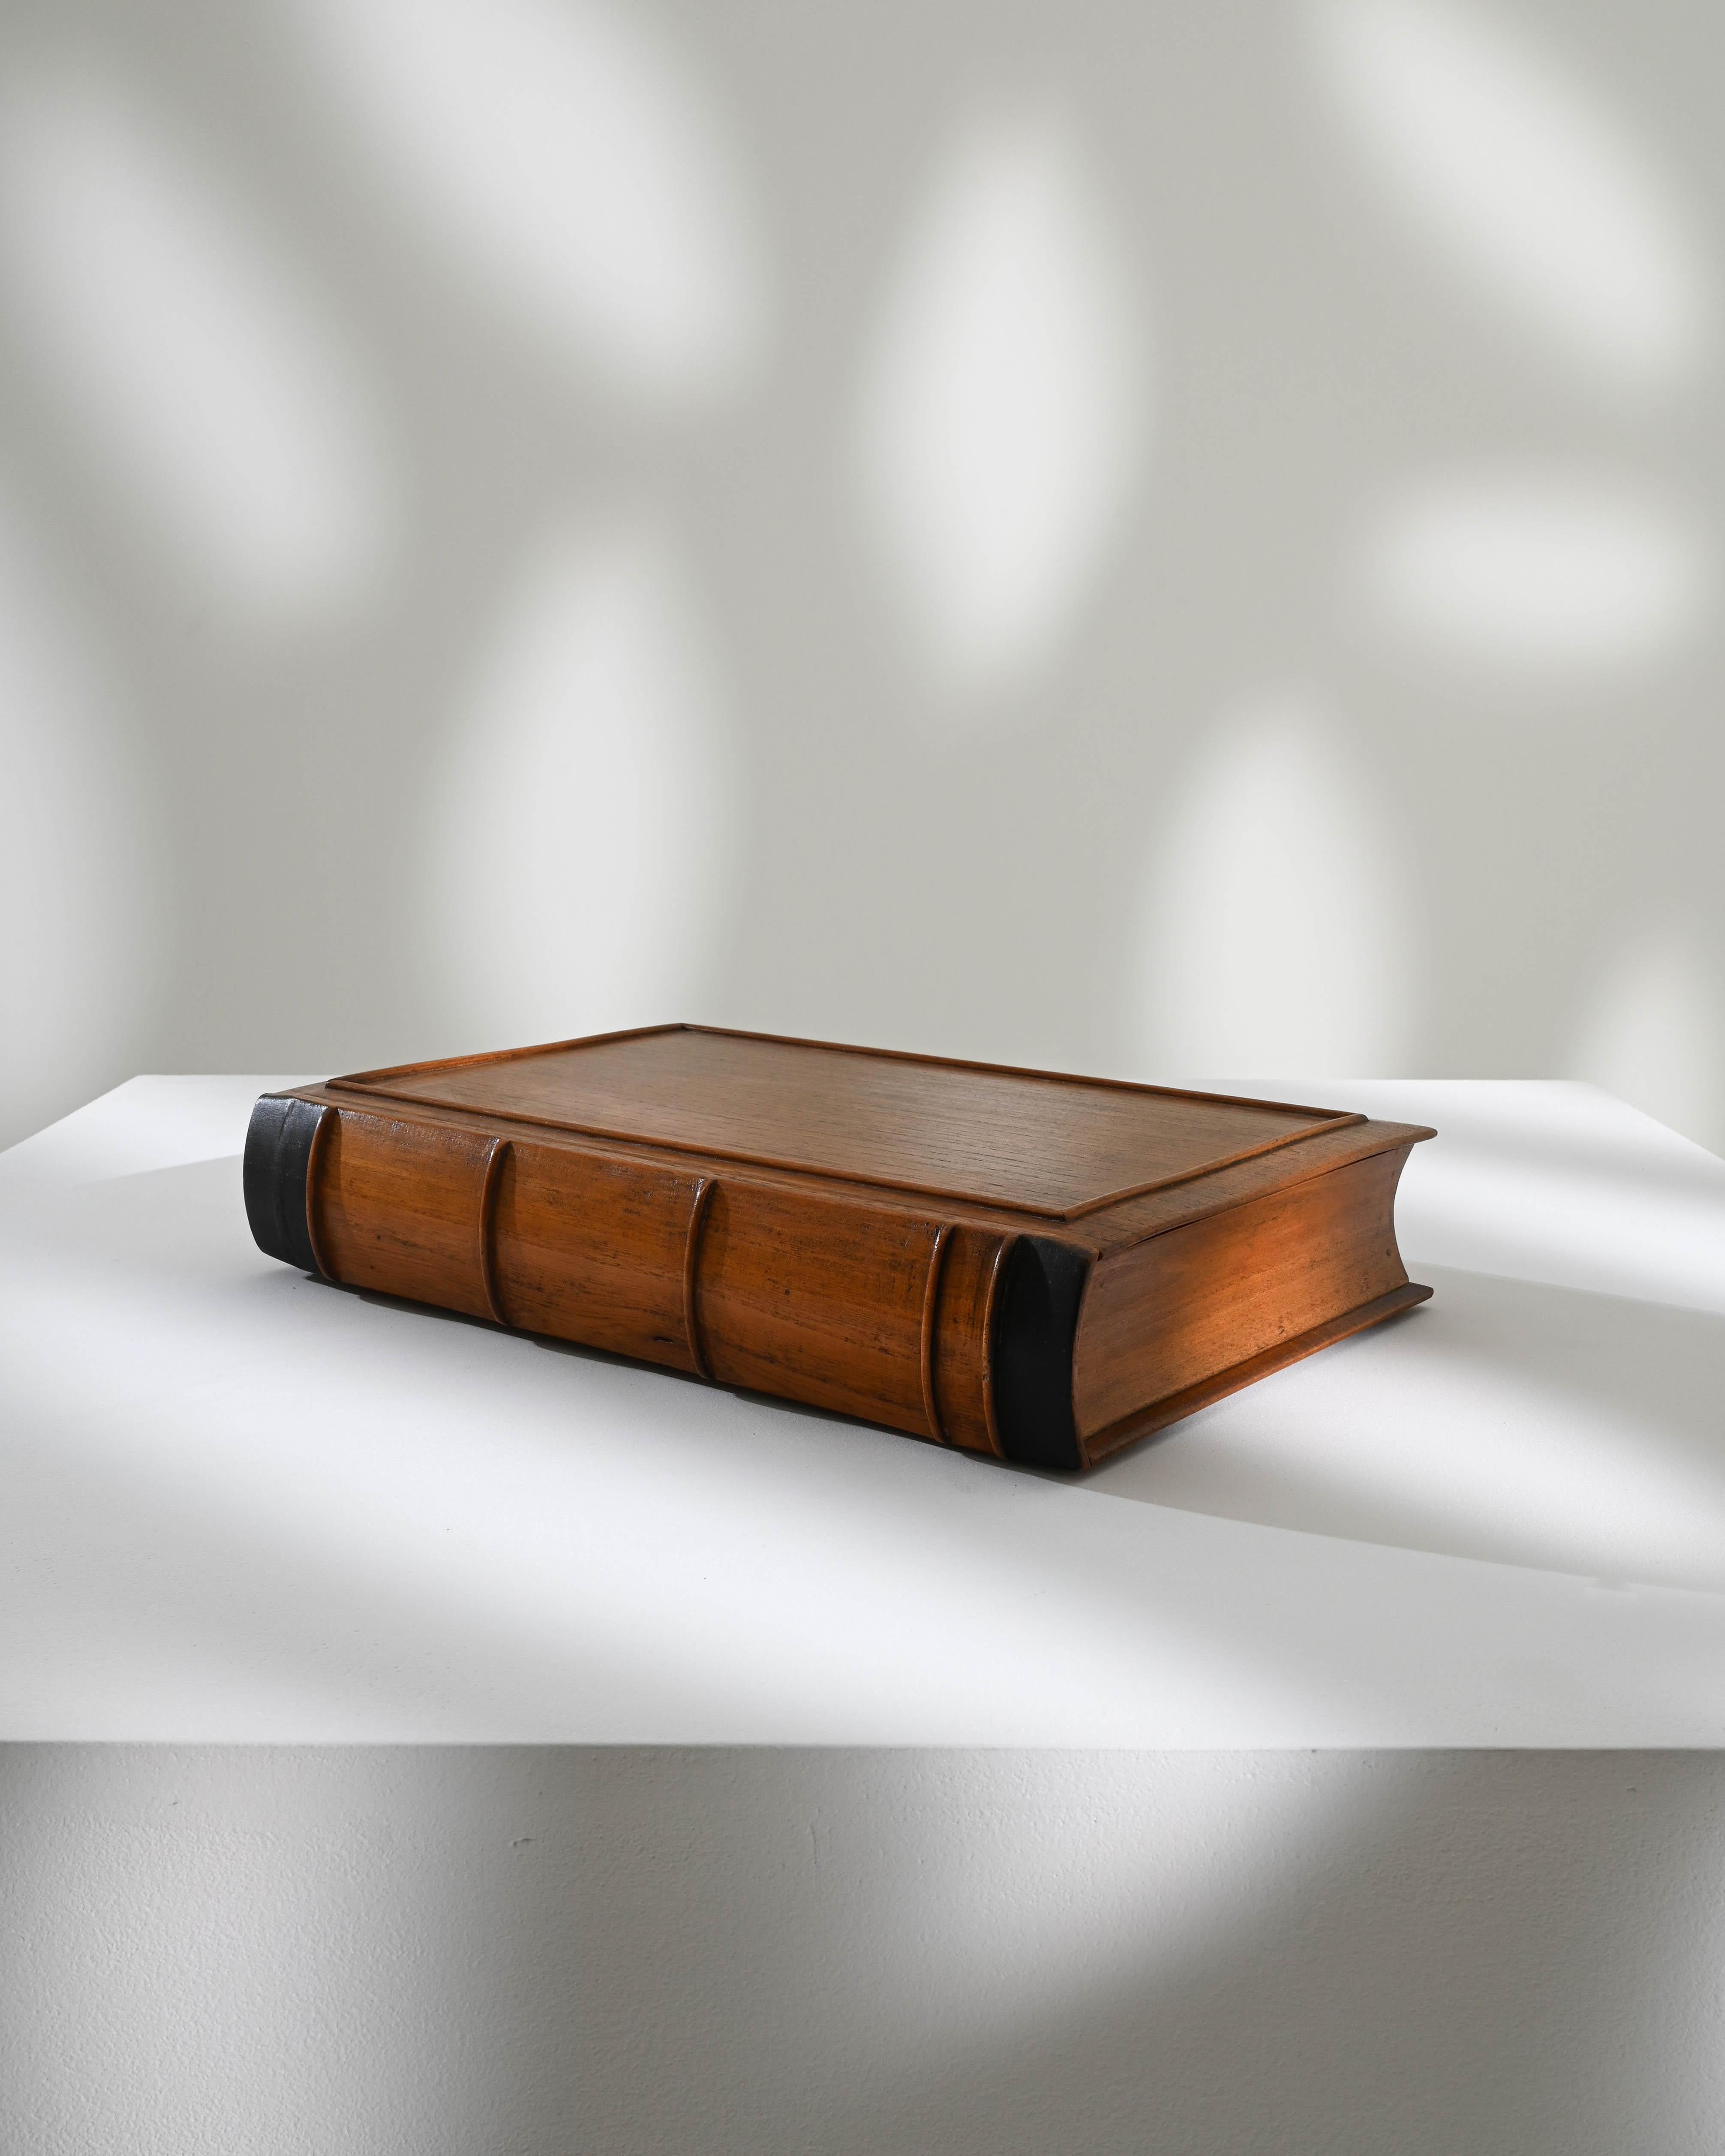 Vintage Wooden Book-Shaped Box 1